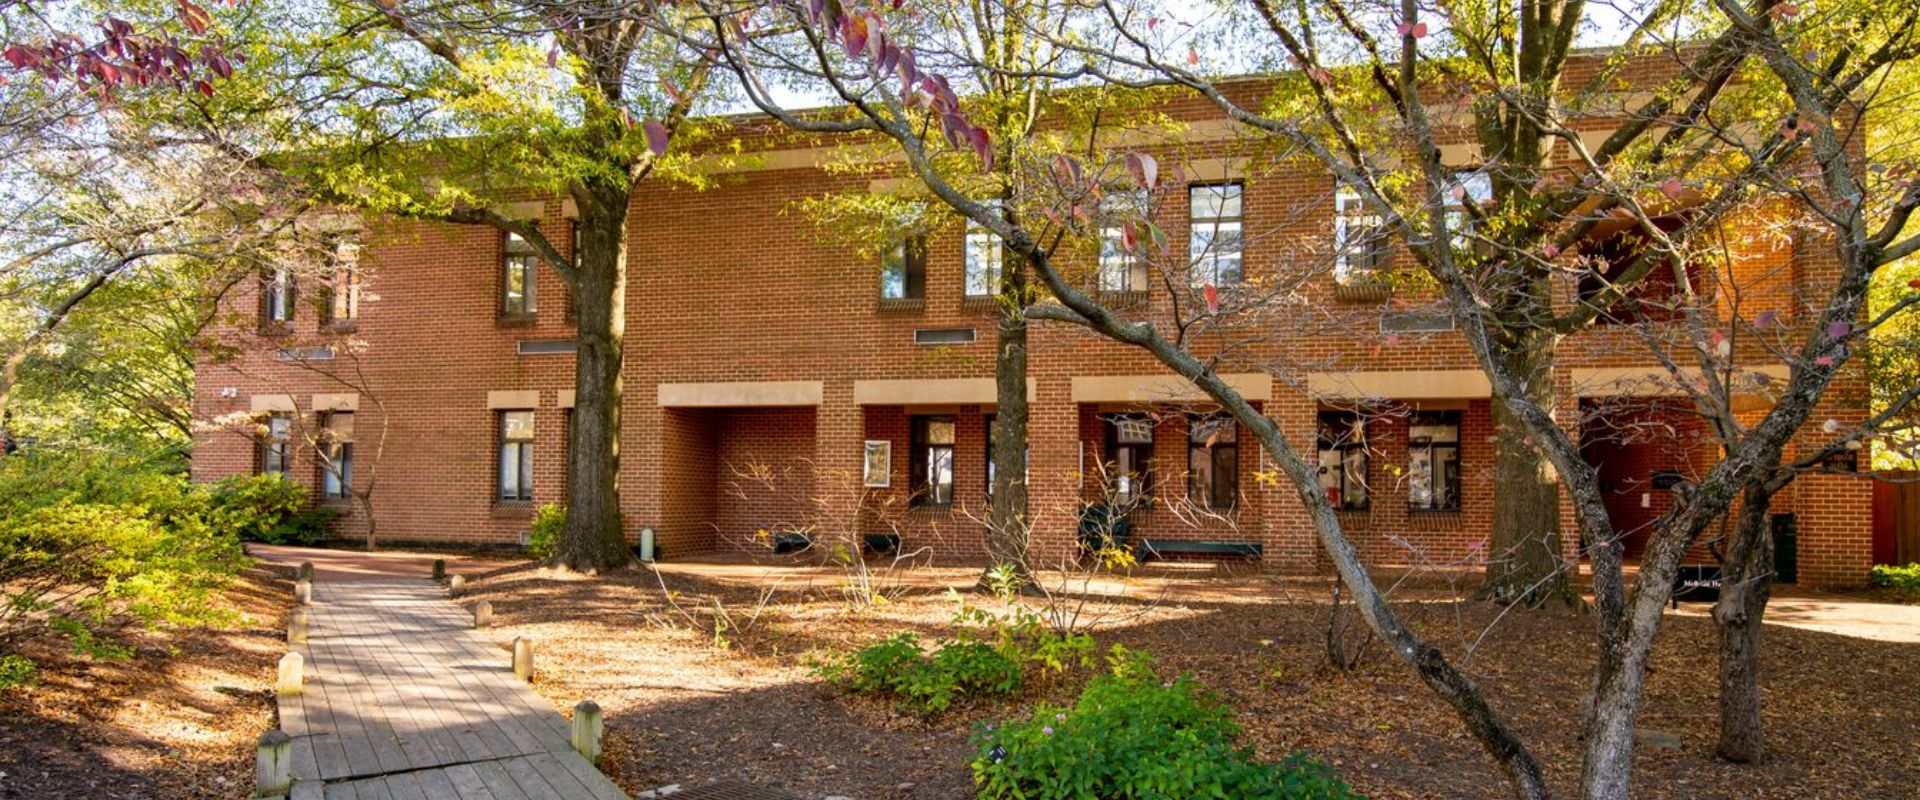 Lower School building with path